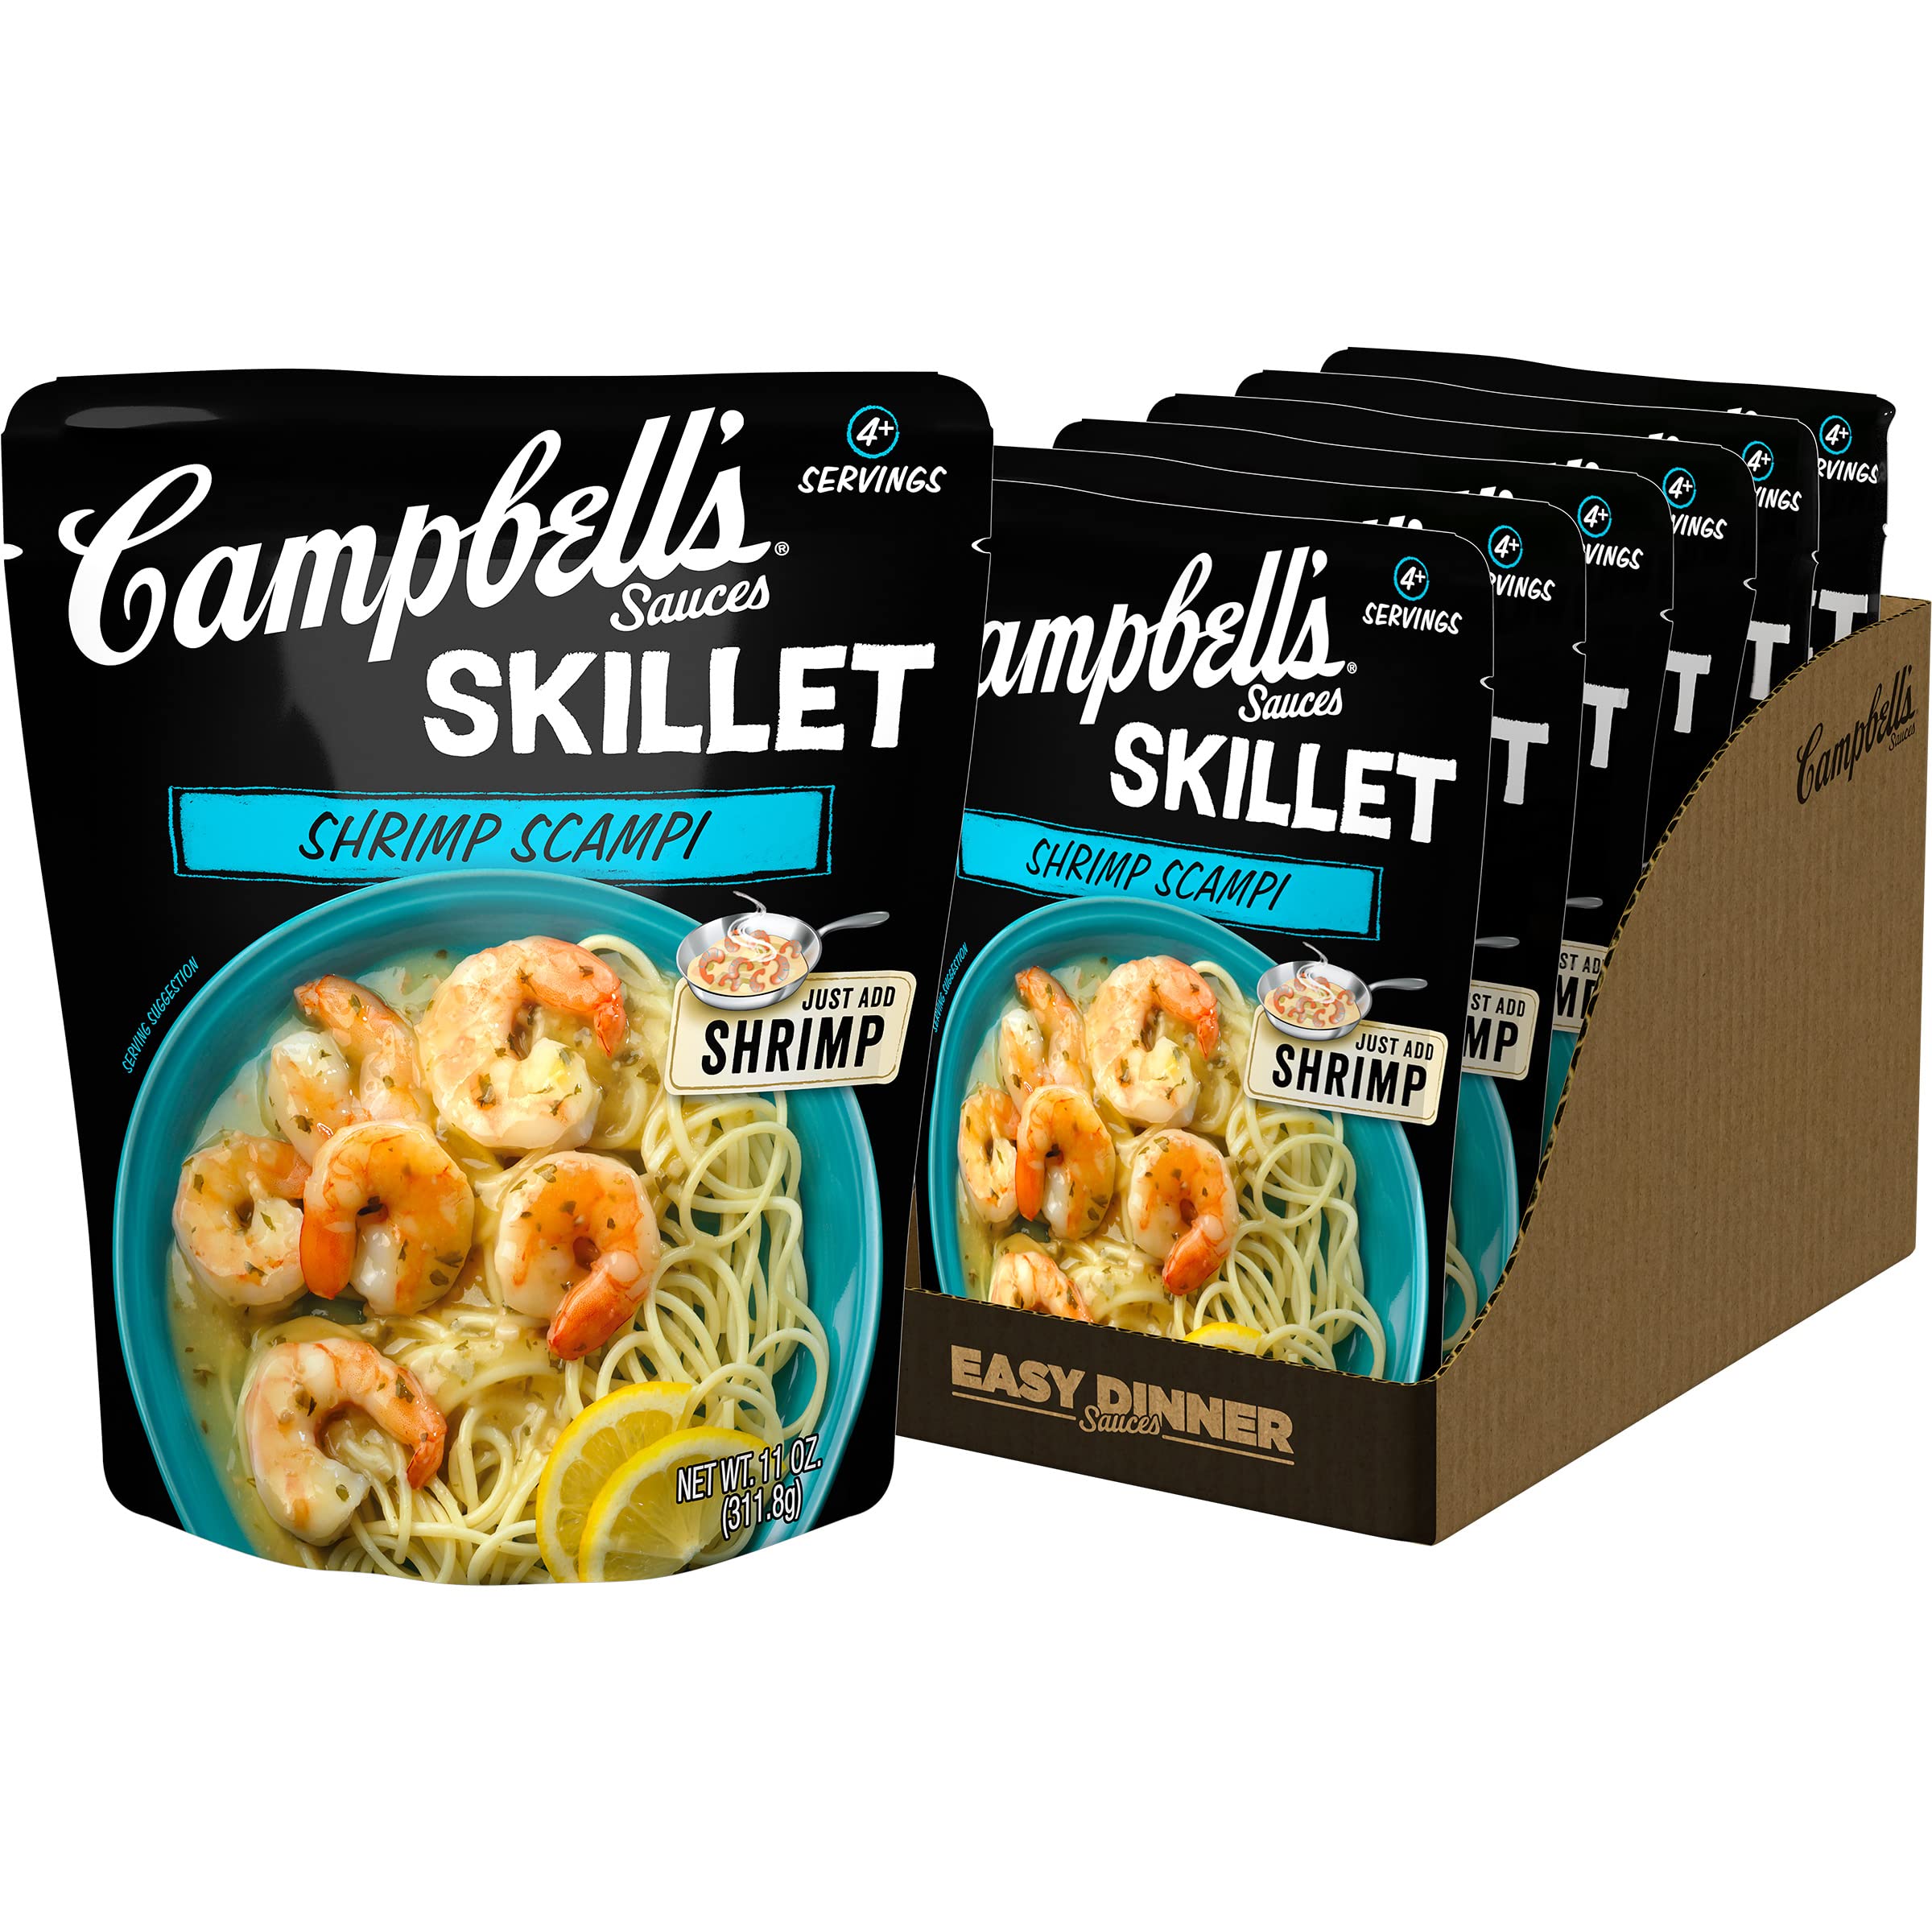 Campbell's Skillet Sauces Review - Quick Chicken Marsala - Smart